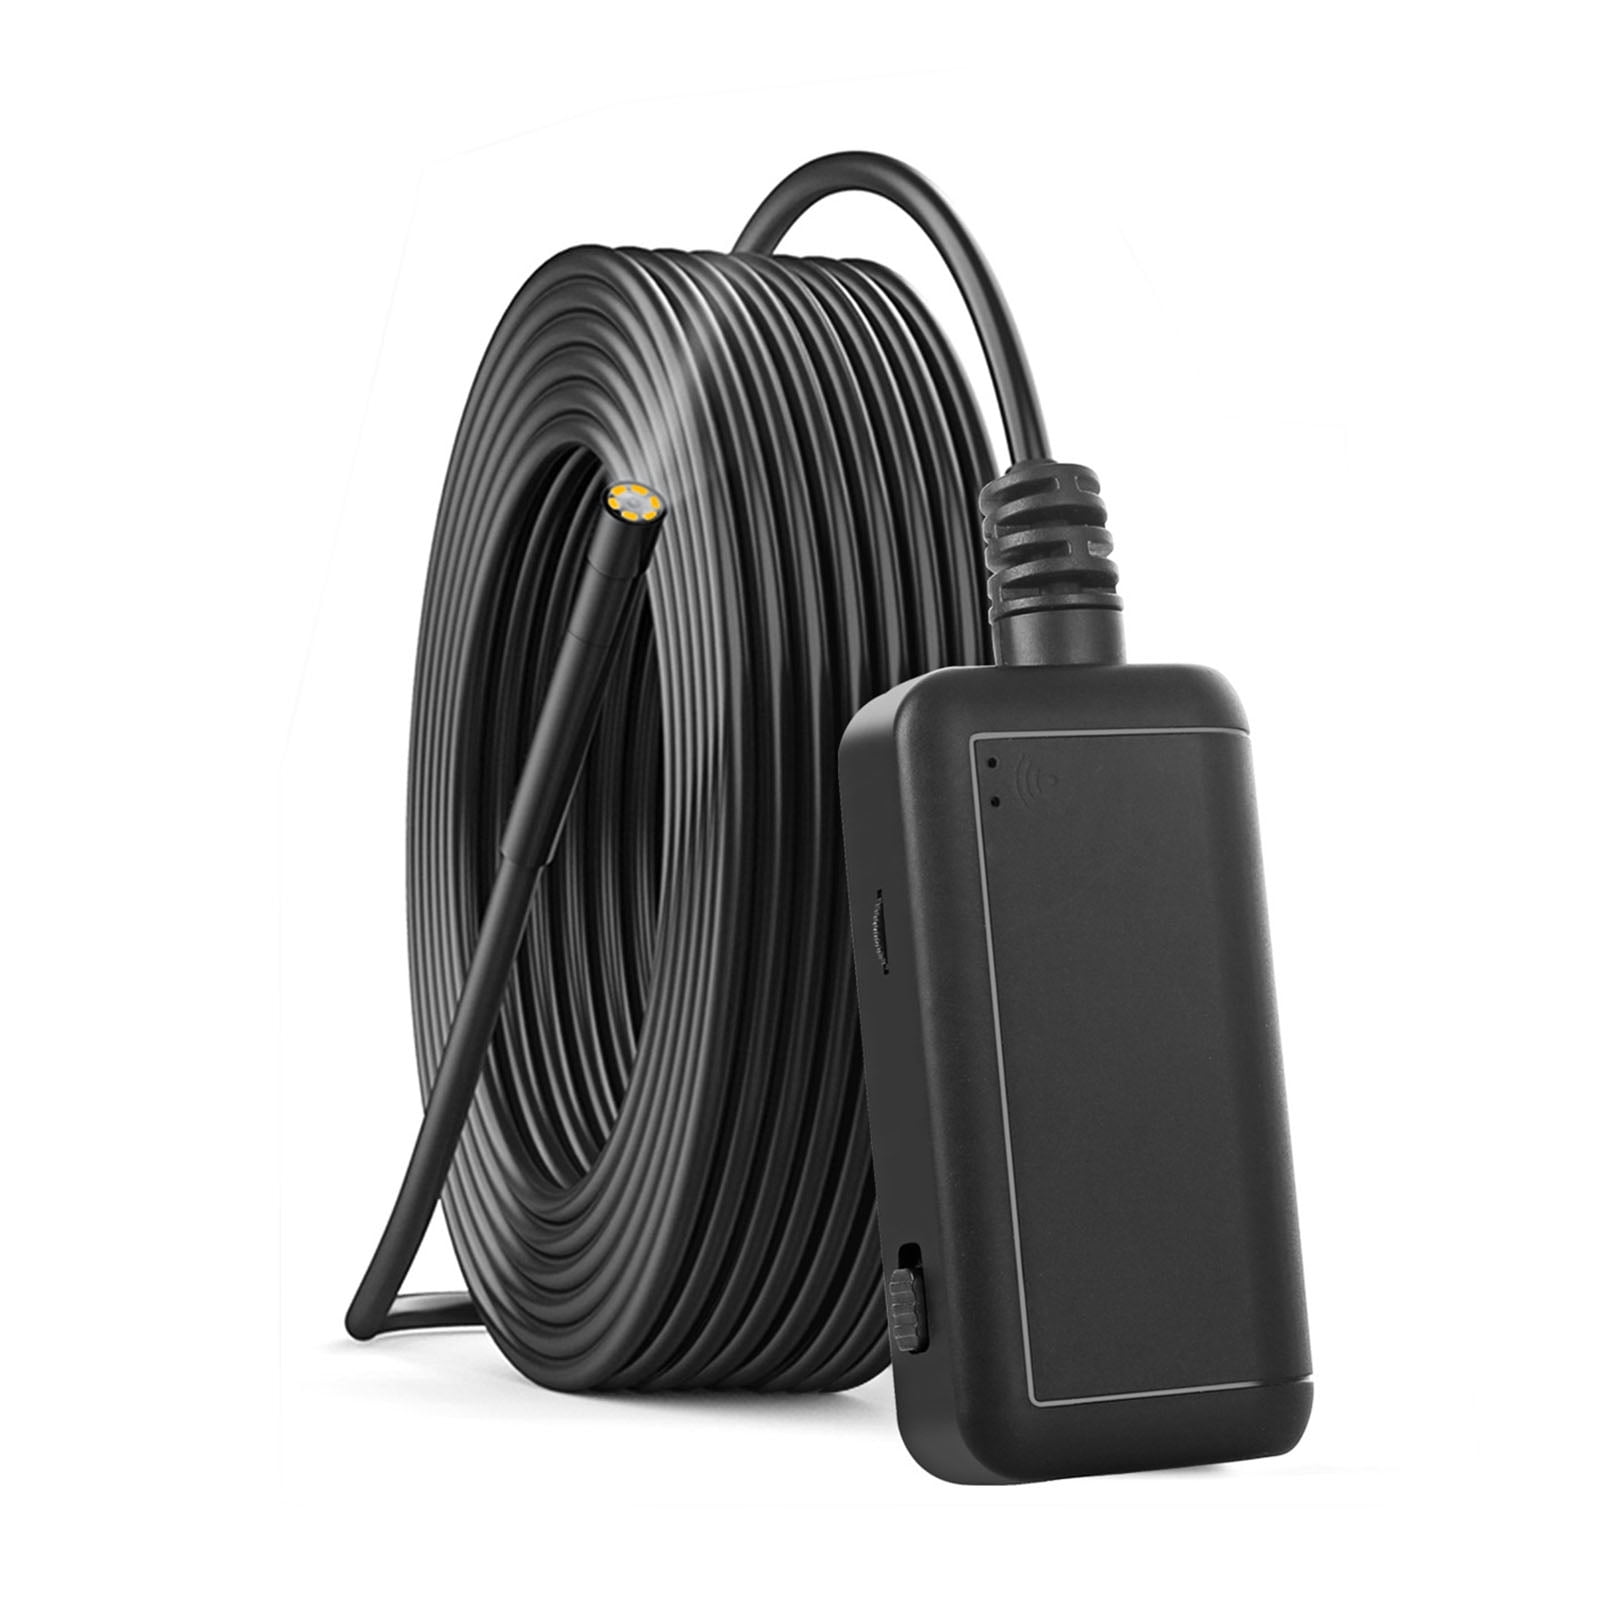 Coersd 5.5mm Endoscope IP67 Waterproof Borescope Inspection Camera 6 LED Lights for Android Phone 